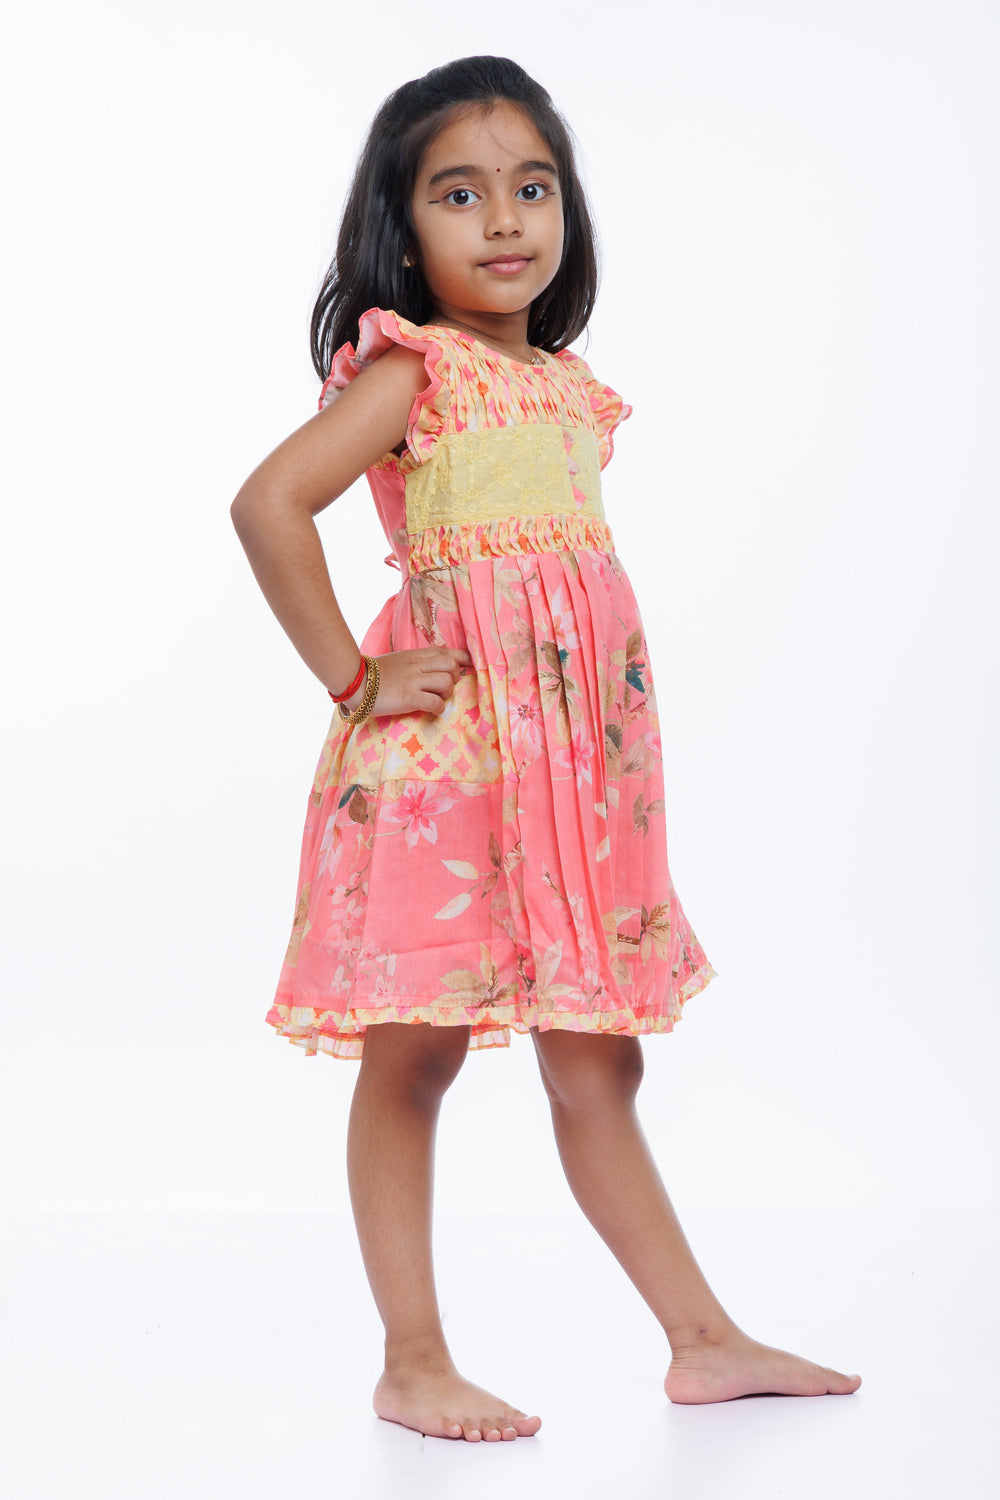 The Nesavu Girls Cotton Frock Charming Pink Cotton Floral Frock with Lace Accents for Girls Nesavu Girls Pink Floral Cotton Frock | Lace Detailed Summer Dress for Kids | The Nesavu